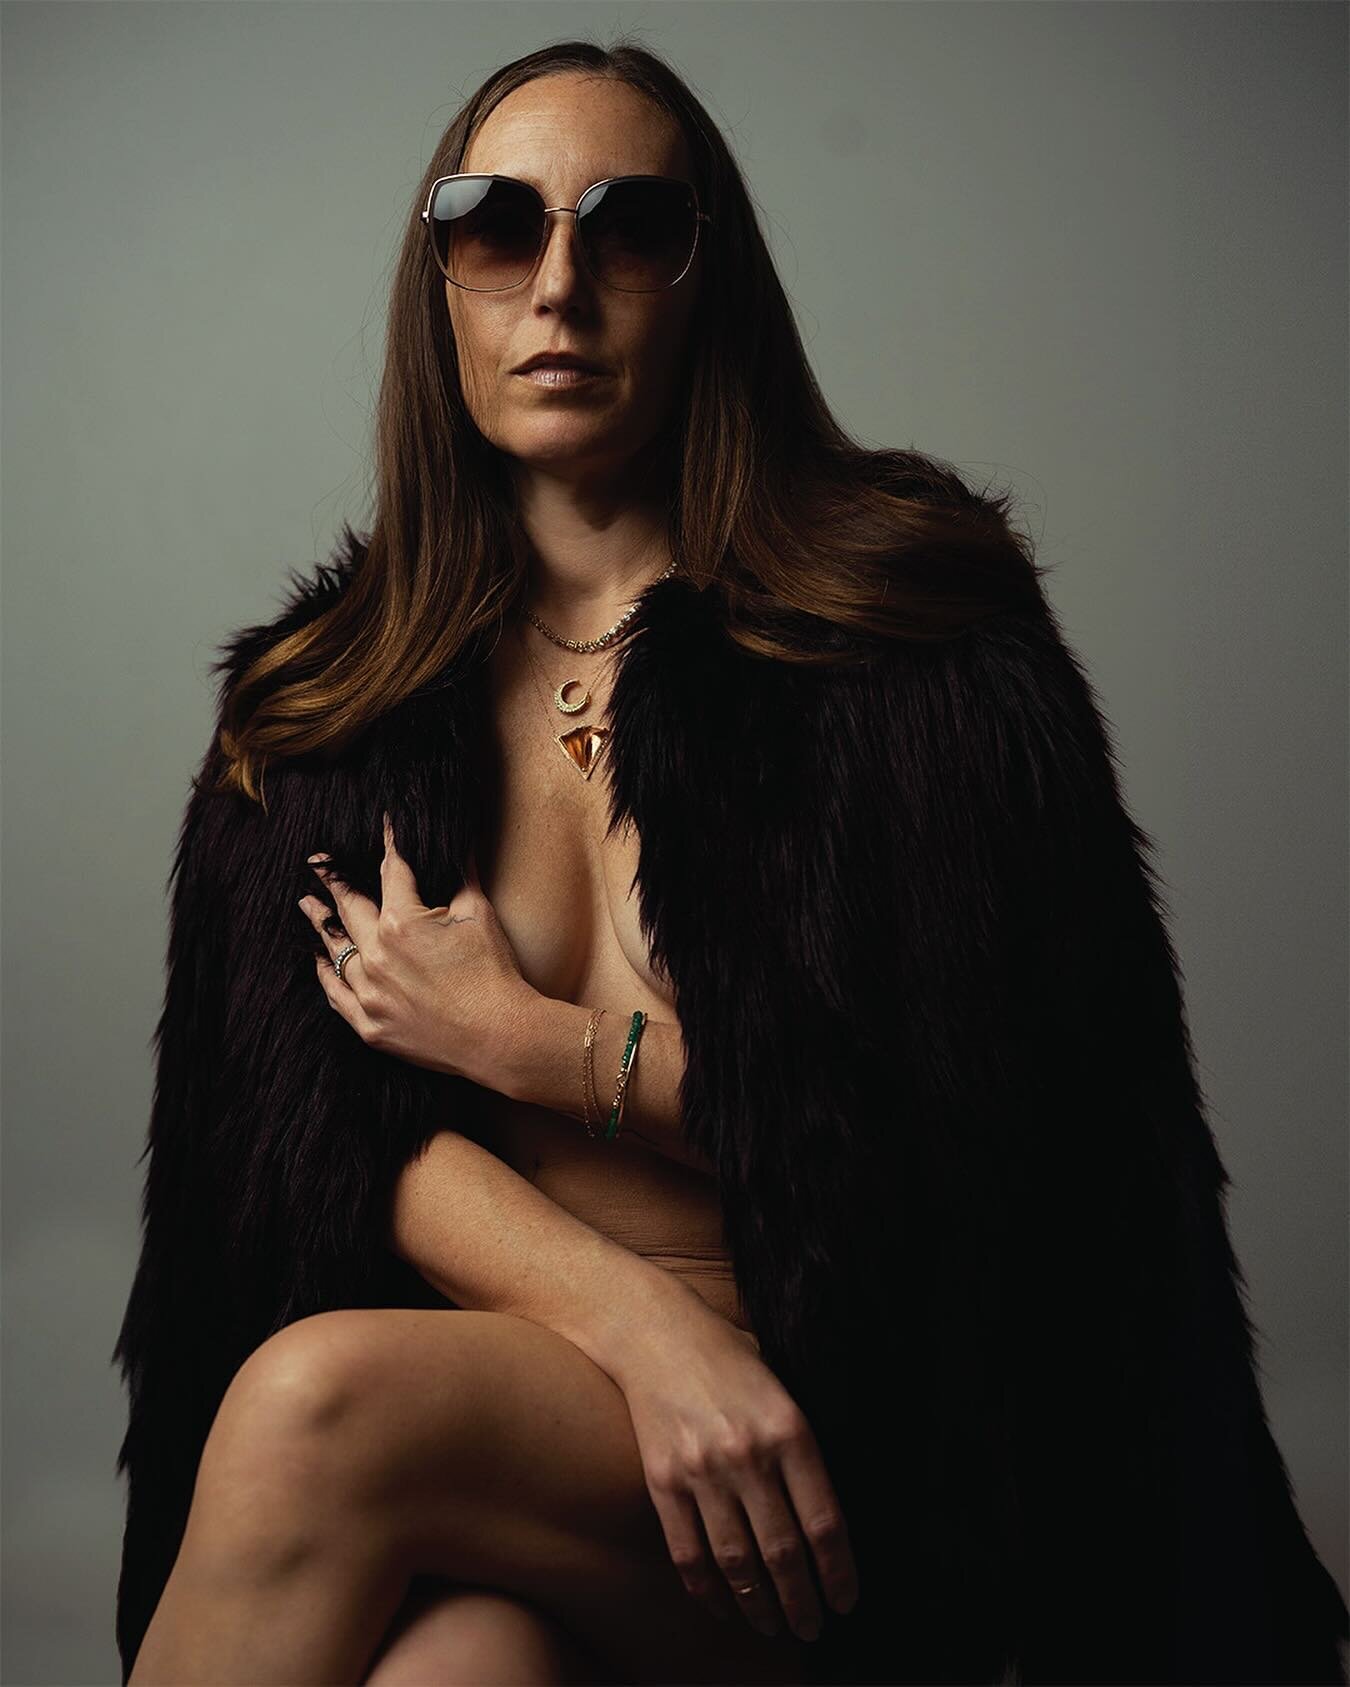 We can&rsquo;t wait to share the fashion with you. Get your tickets now to the 5:30 or 8pm show. Link in bio. Se you wednesday! 

Faux fur jacket by Spirit Hoods with necklaces by Jacquie Aiche and sunglasses from Barton Perreira. Bracelet and ring m